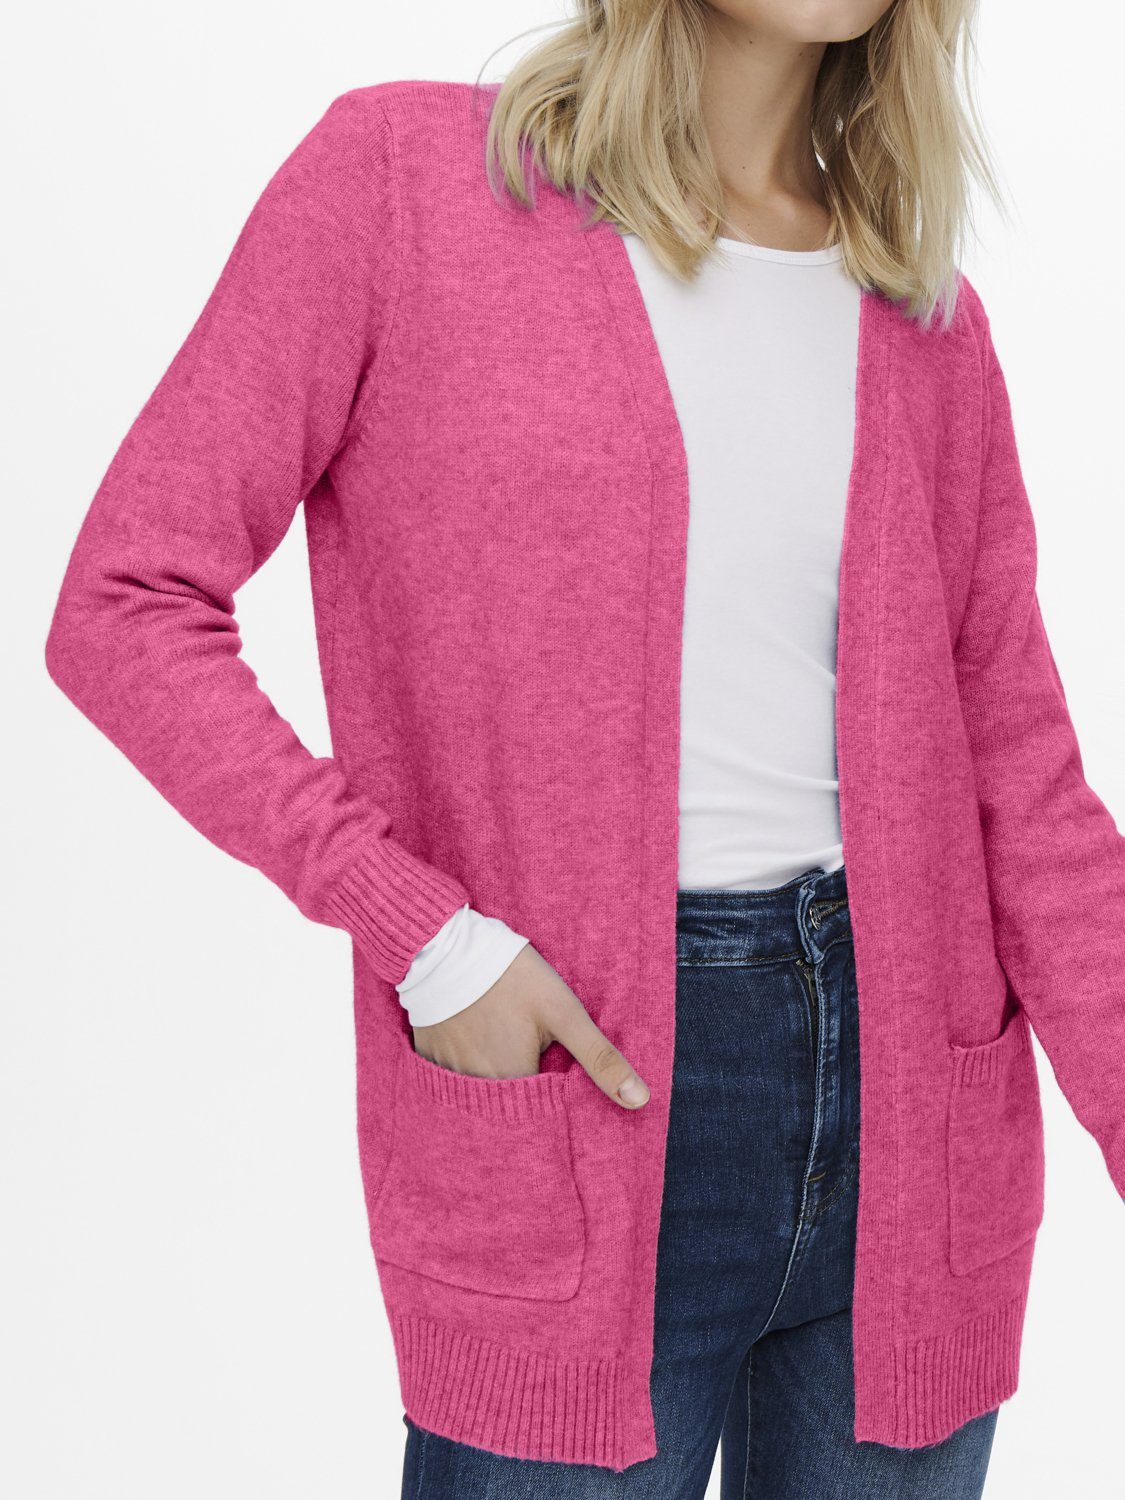 Knt Open - Only OnlLesly Pink Cardigan offen Cardigan Damen female ONLY Strick-Jacke